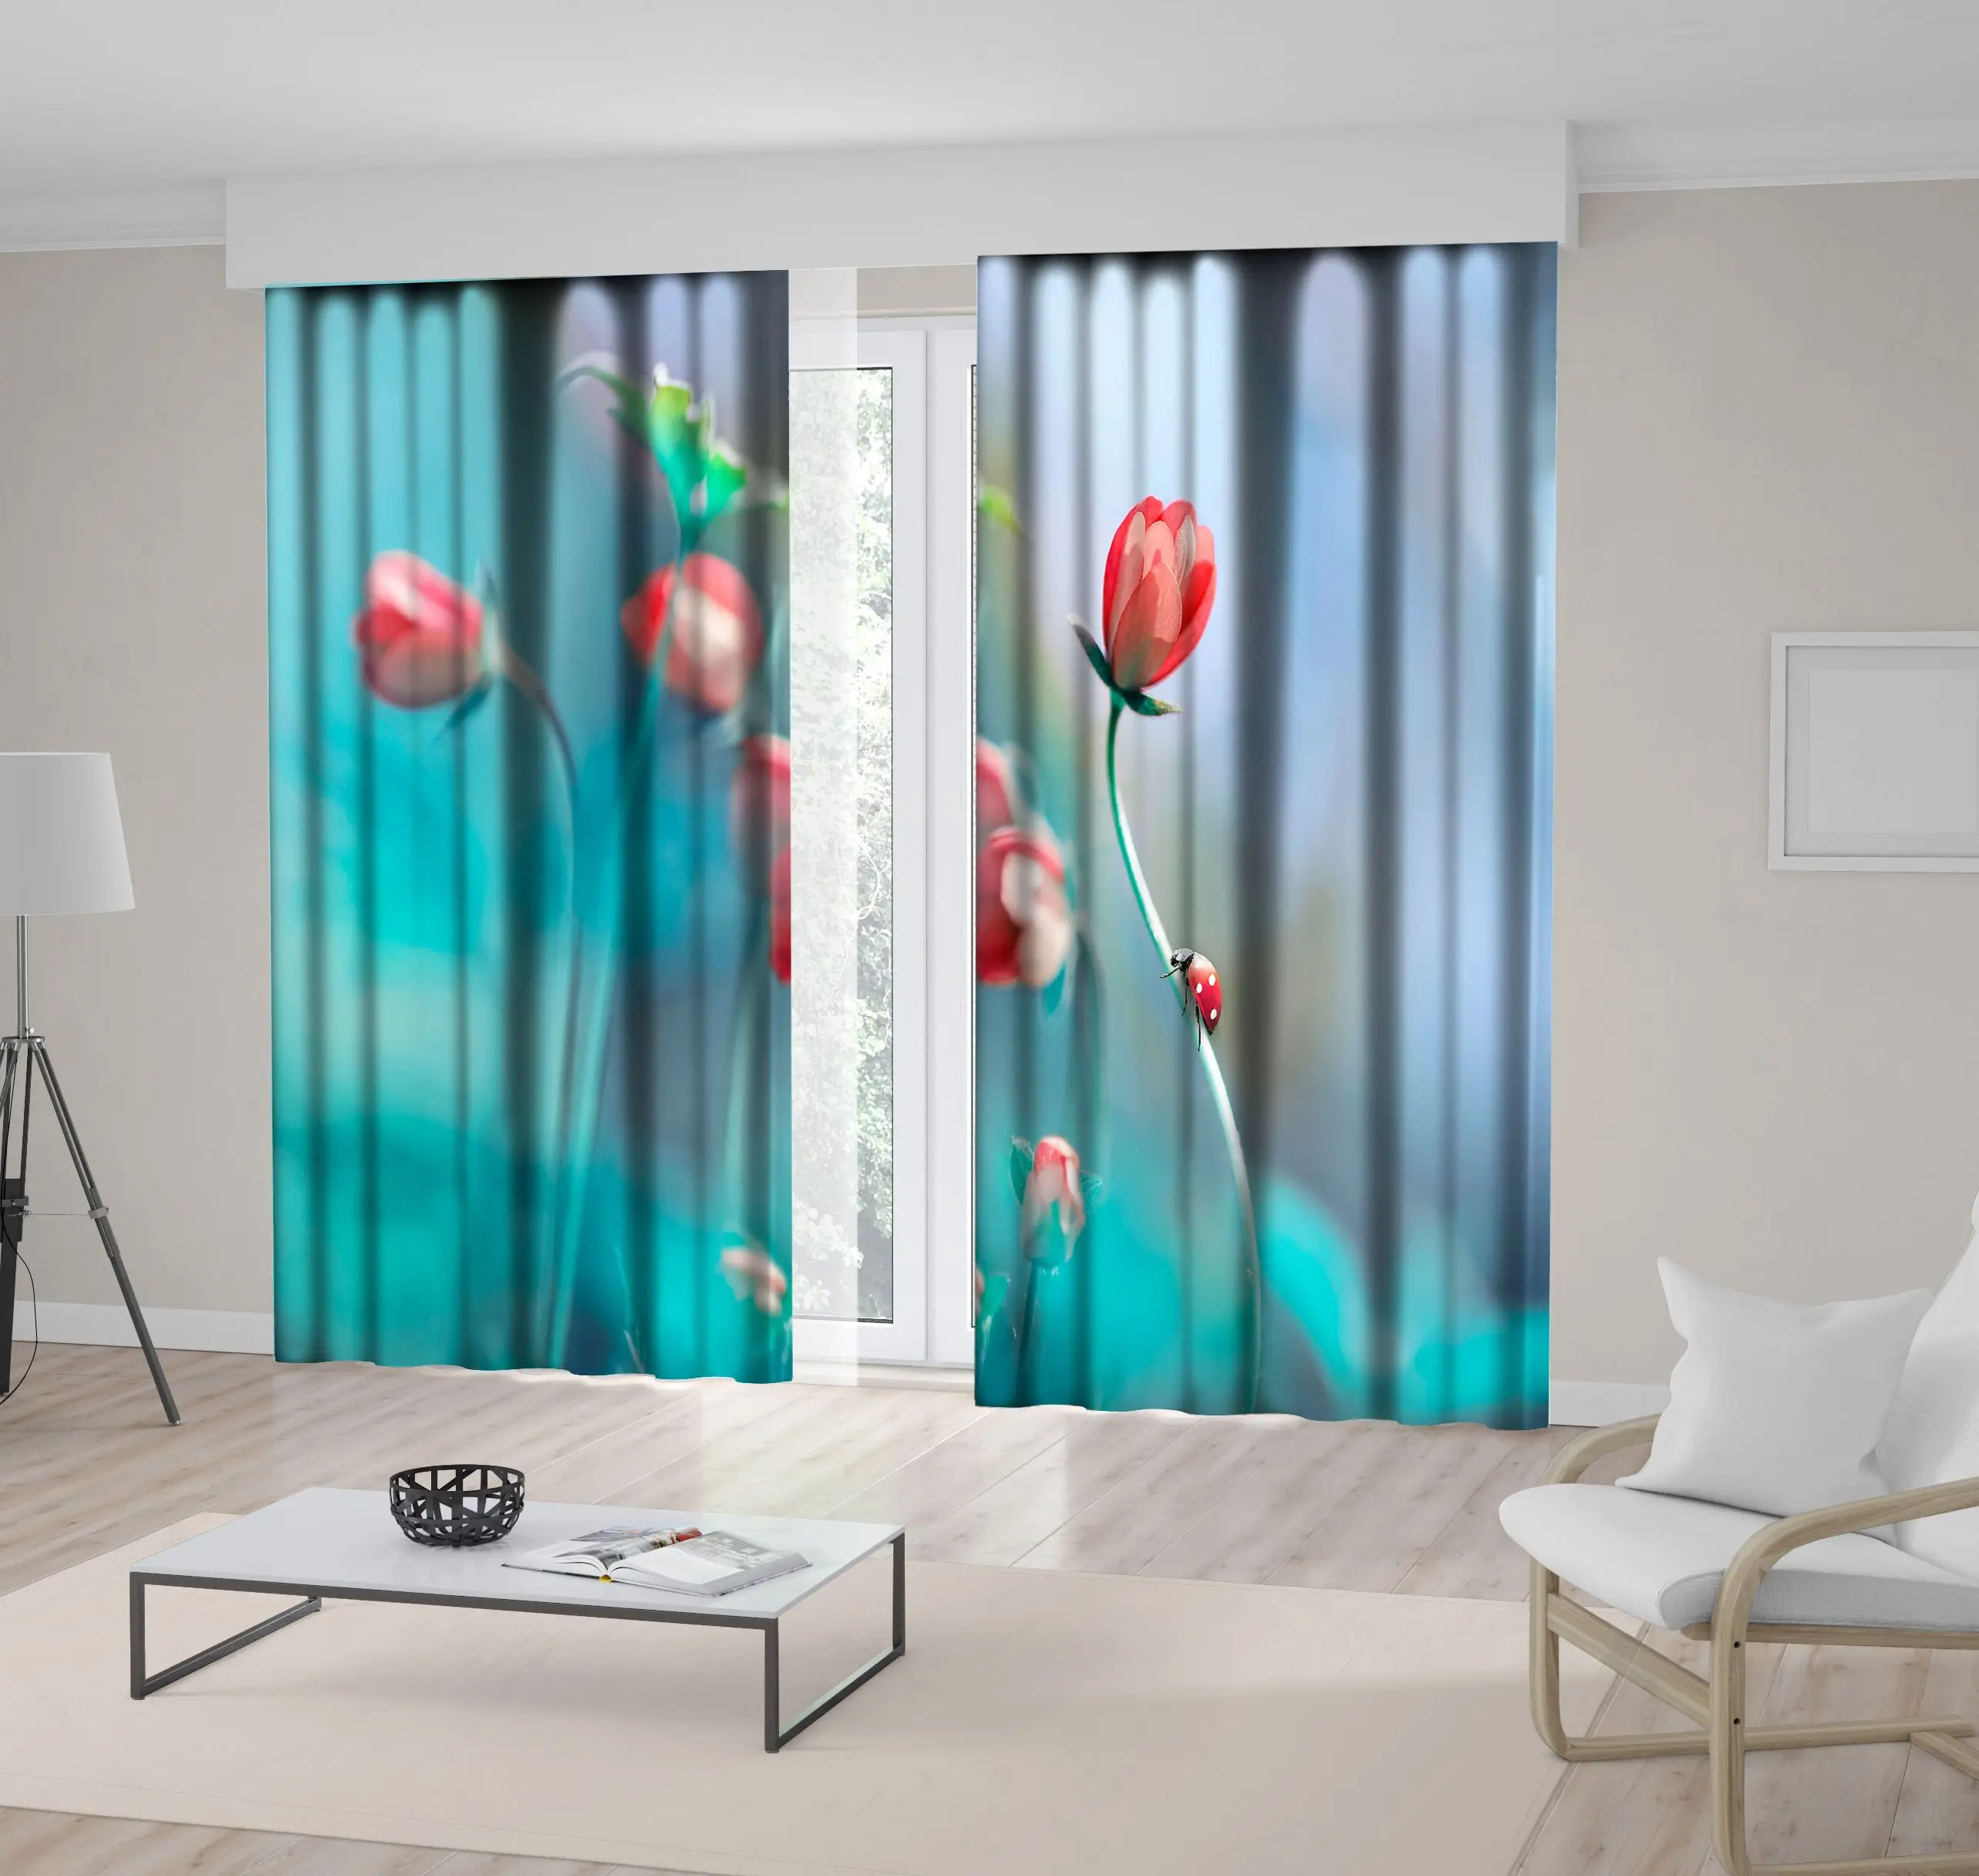 

Curtain Tenderness of Nature Flowers and Ladybug in Spring Outdoors Magical Artistic Image in Soft Colors Red Blue Green